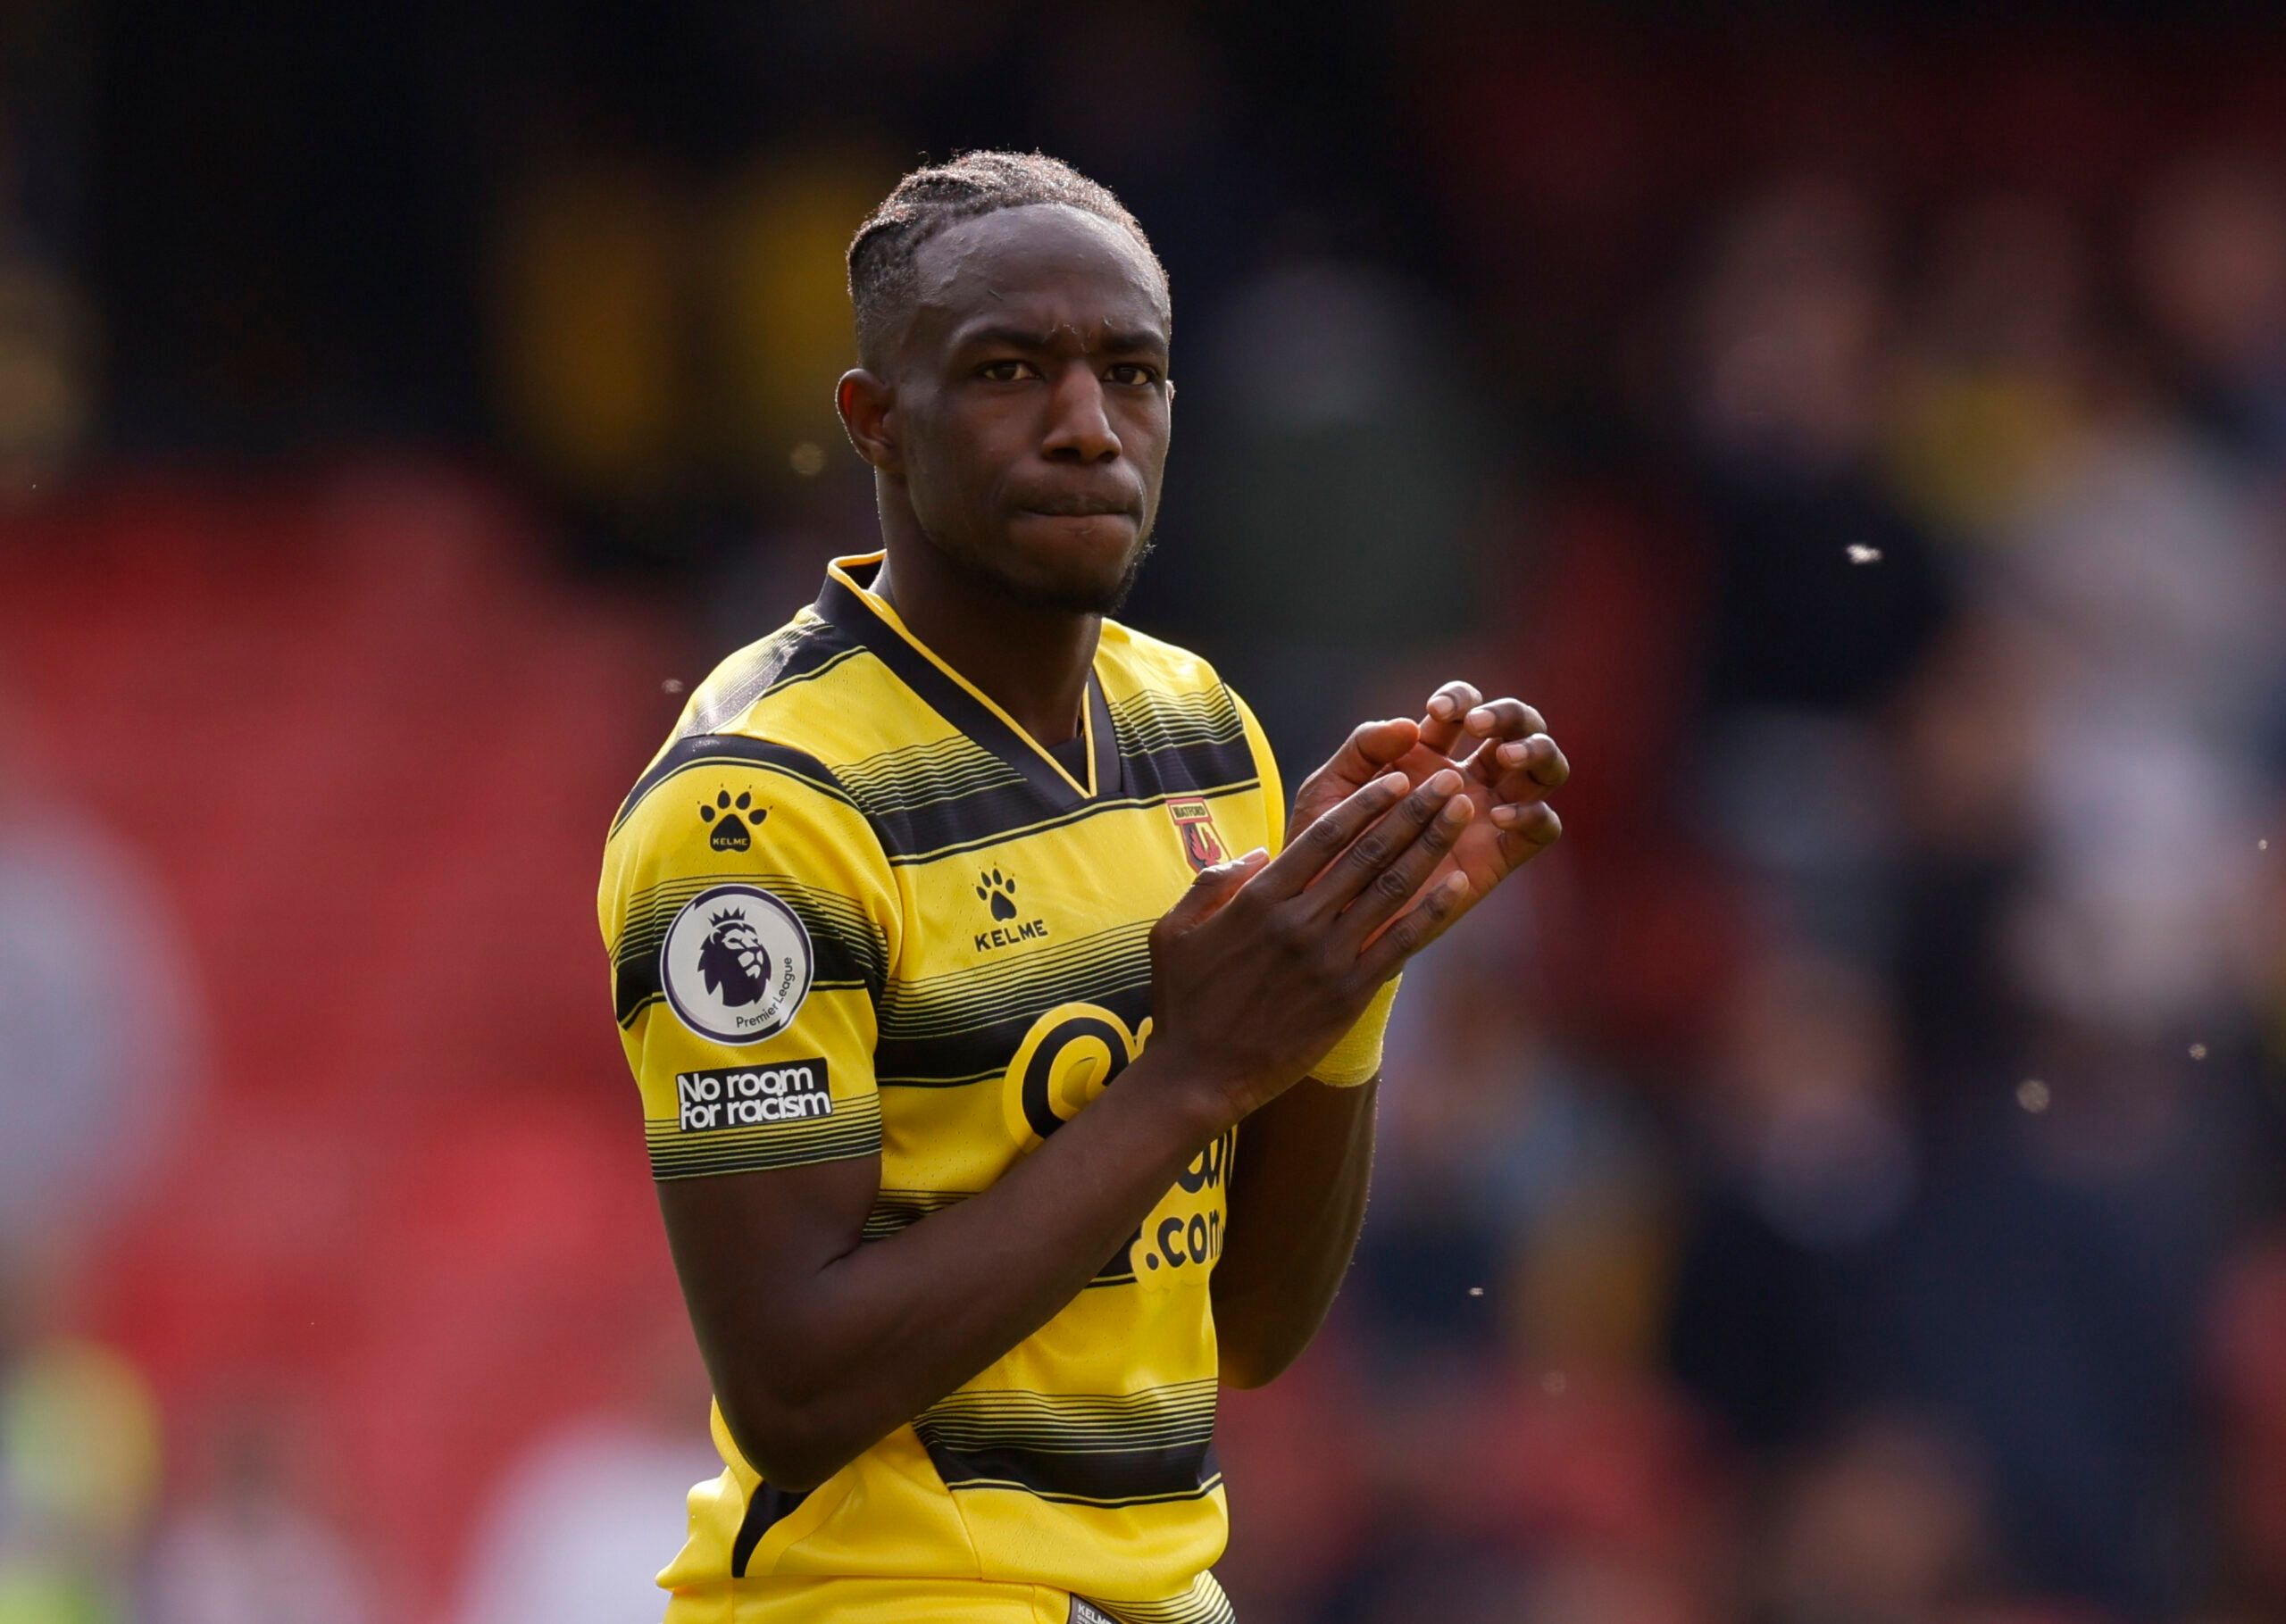 Soccer Football - Premier League - Watford v Burnley - Vicarage Road, Watford, Britain - April 30, 2022 Watford's Hassane Kamara looks dejected as he applauds the fans after the match Action Images via Reuters/Andrew Couldridge EDITORIAL USE ONLY. No use with unauthorized audio, video, data, fixture lists, club/league logos or 'live' services. Online in-match use limited to 75 images, no video emulation. No use in betting, games or single club /league/player publications.  Please contact your ac